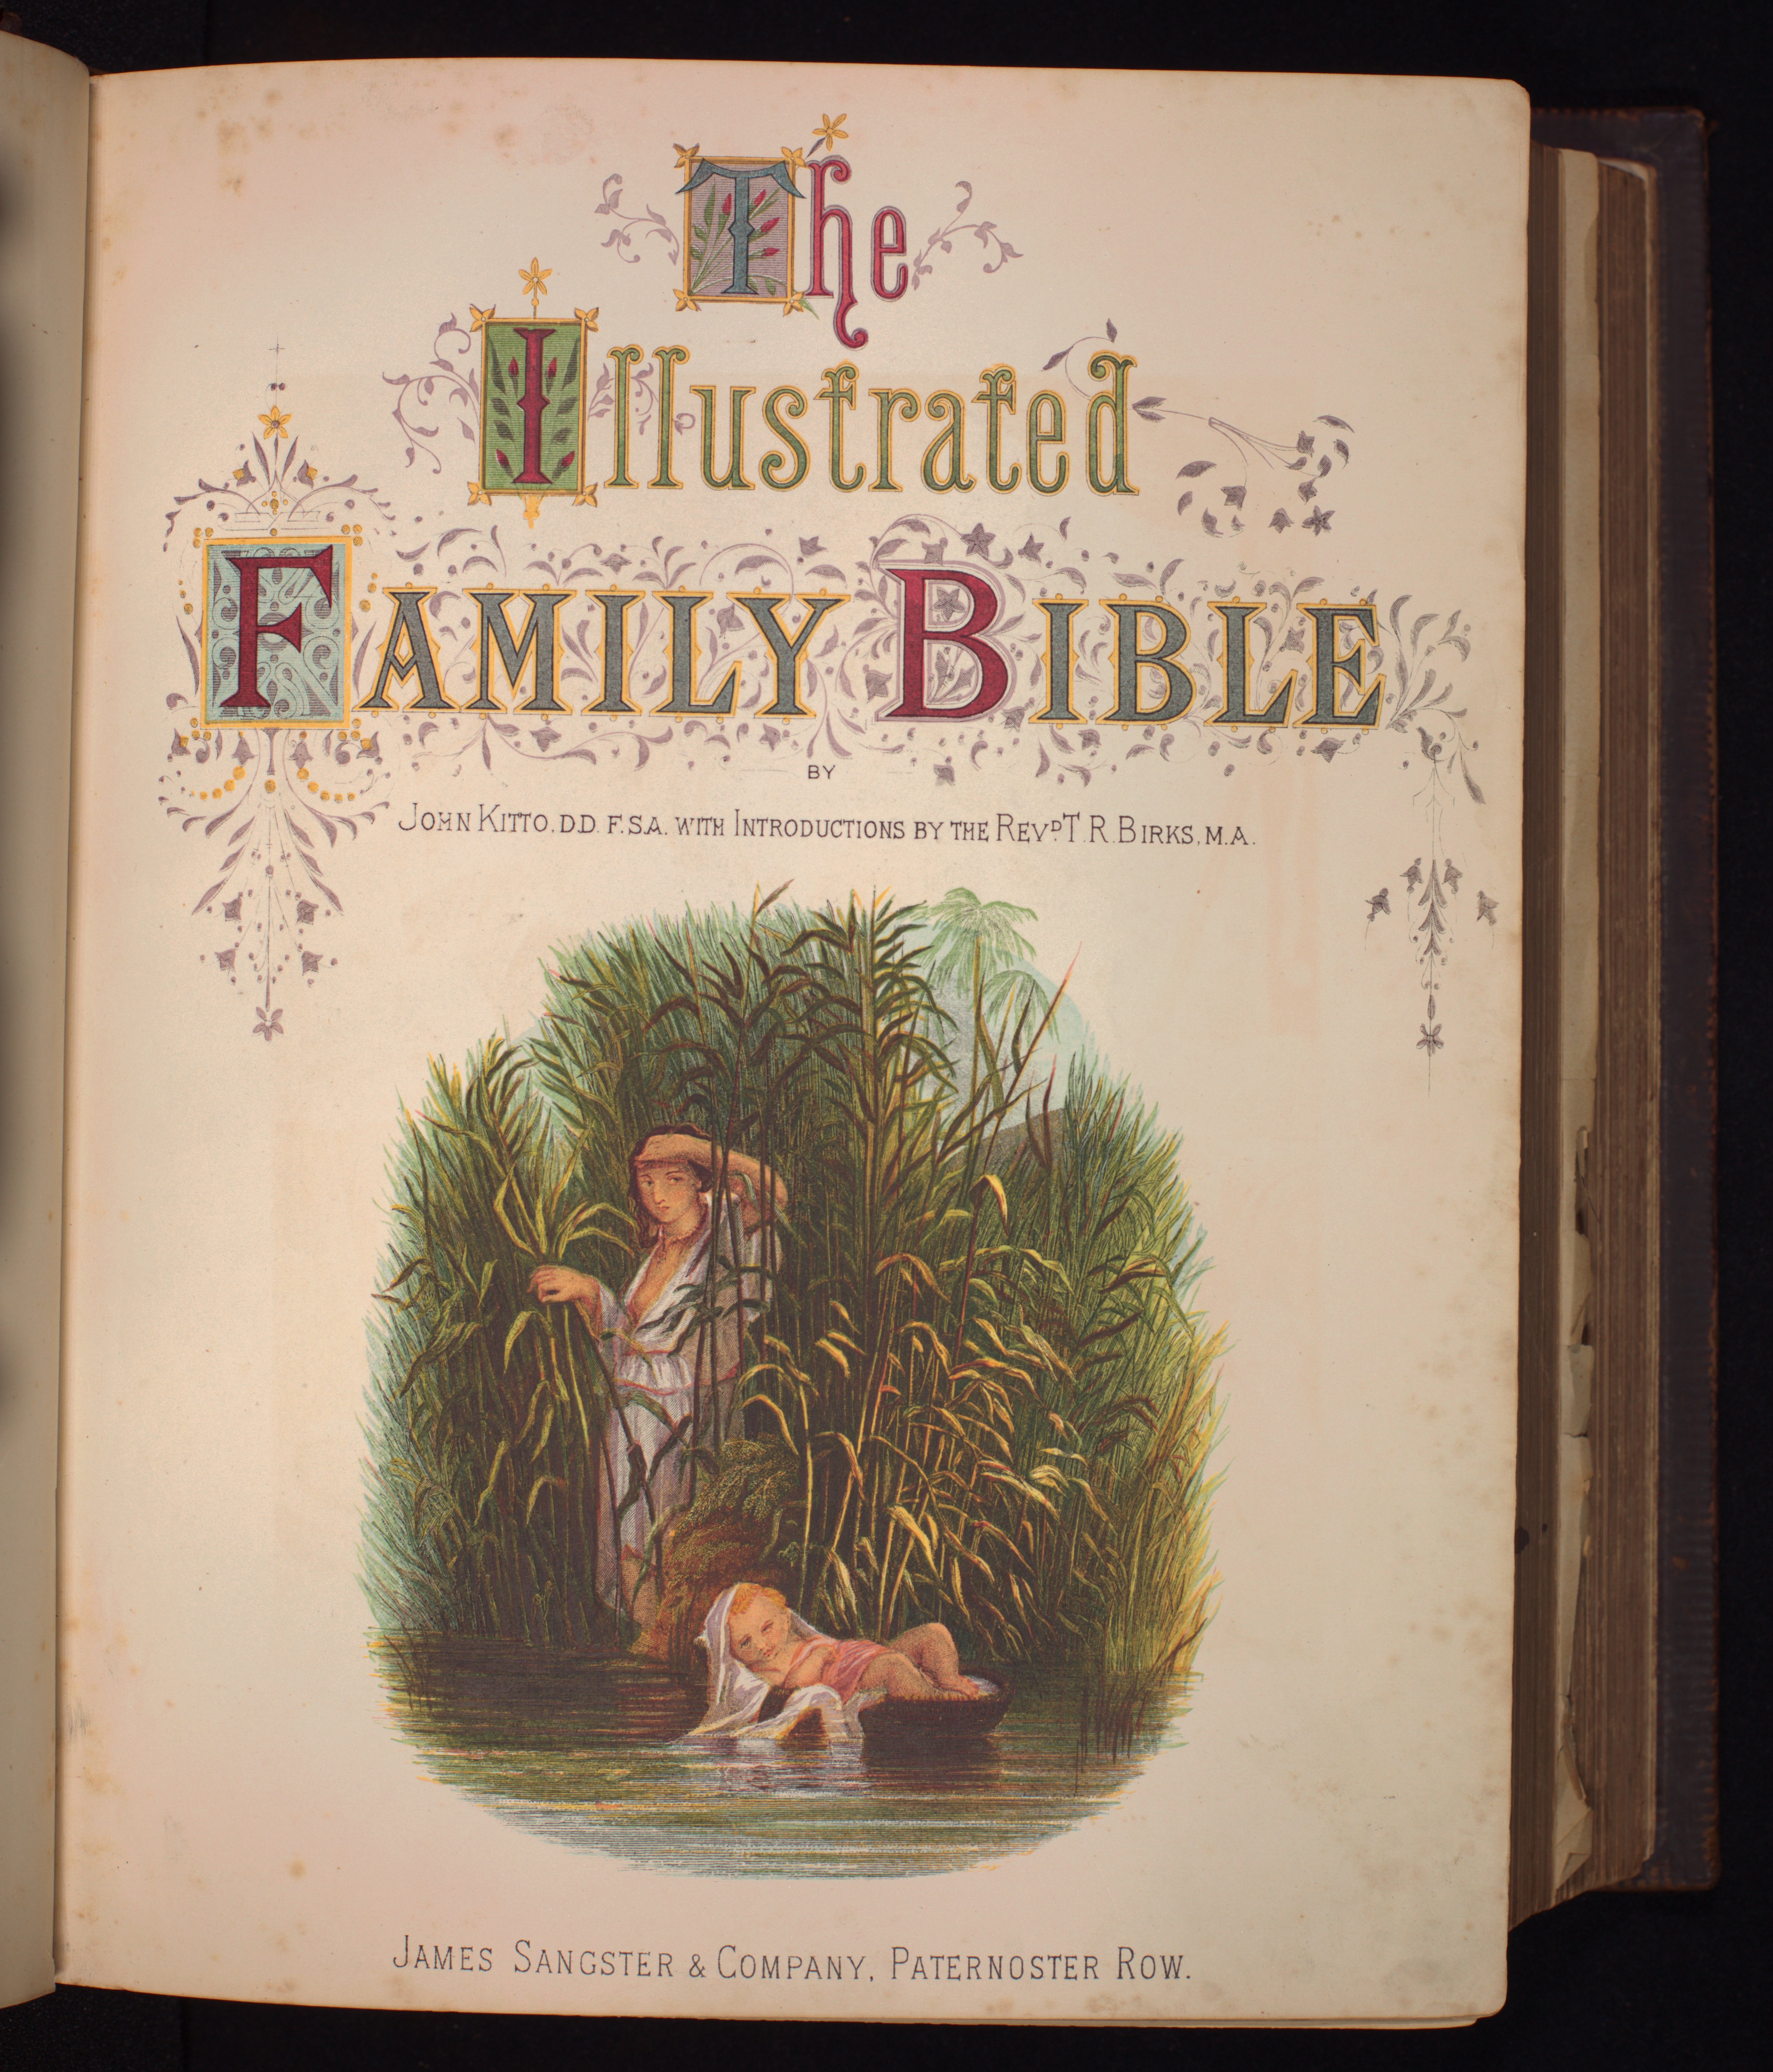 Illustrated Family Bible, 1870 (Bibelmuseum der WWU Münster CC BY-NC-SA)